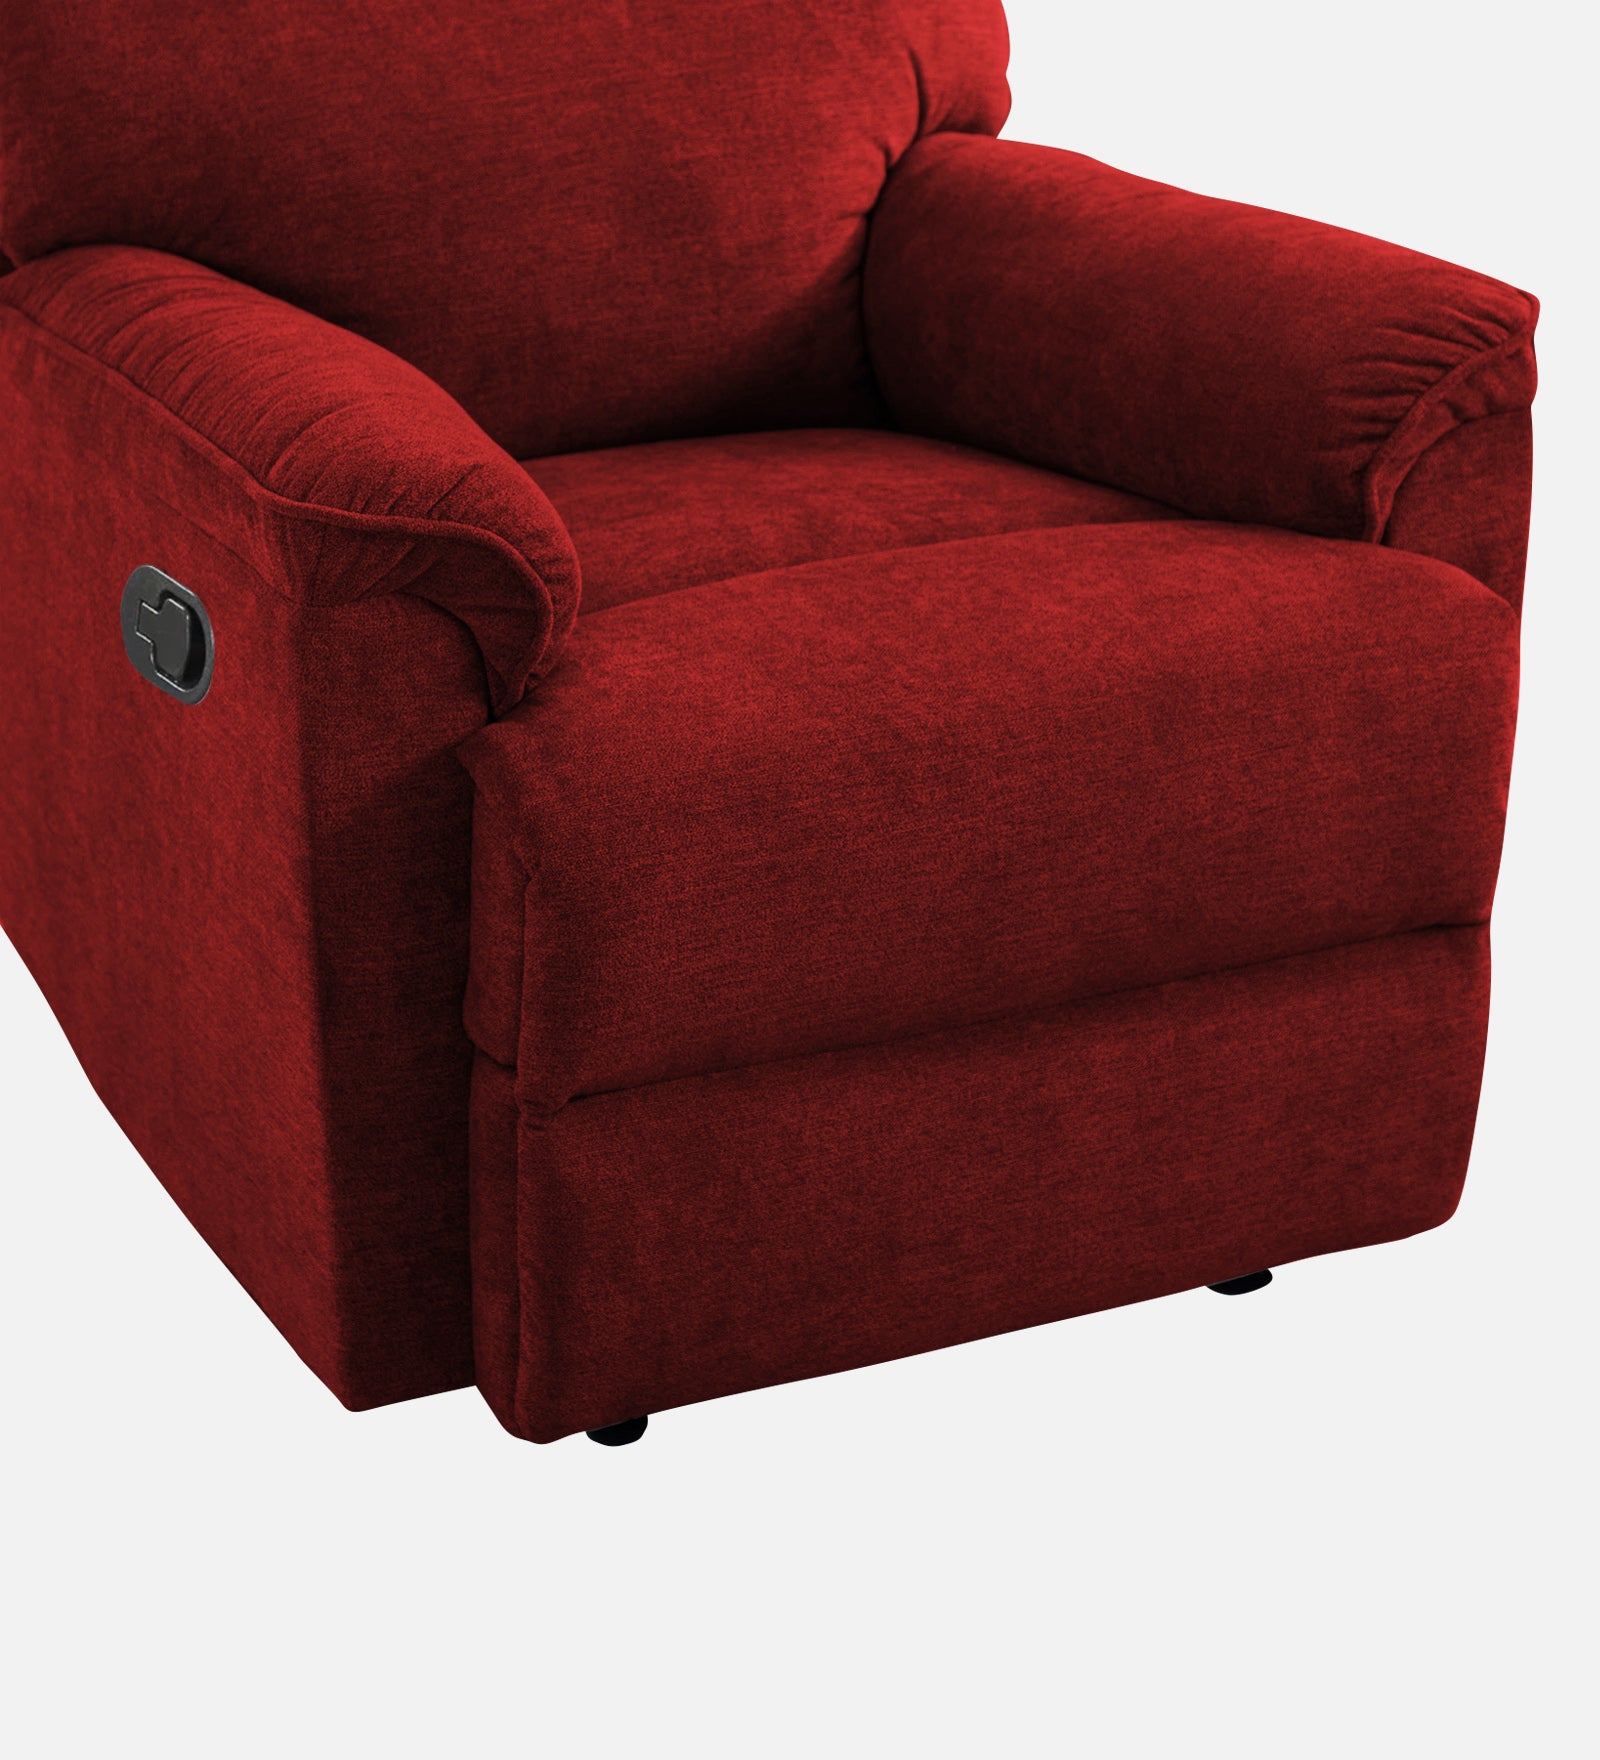 Abby Fabric Manual 1 Seater Recliner In Blood Maroon Colour